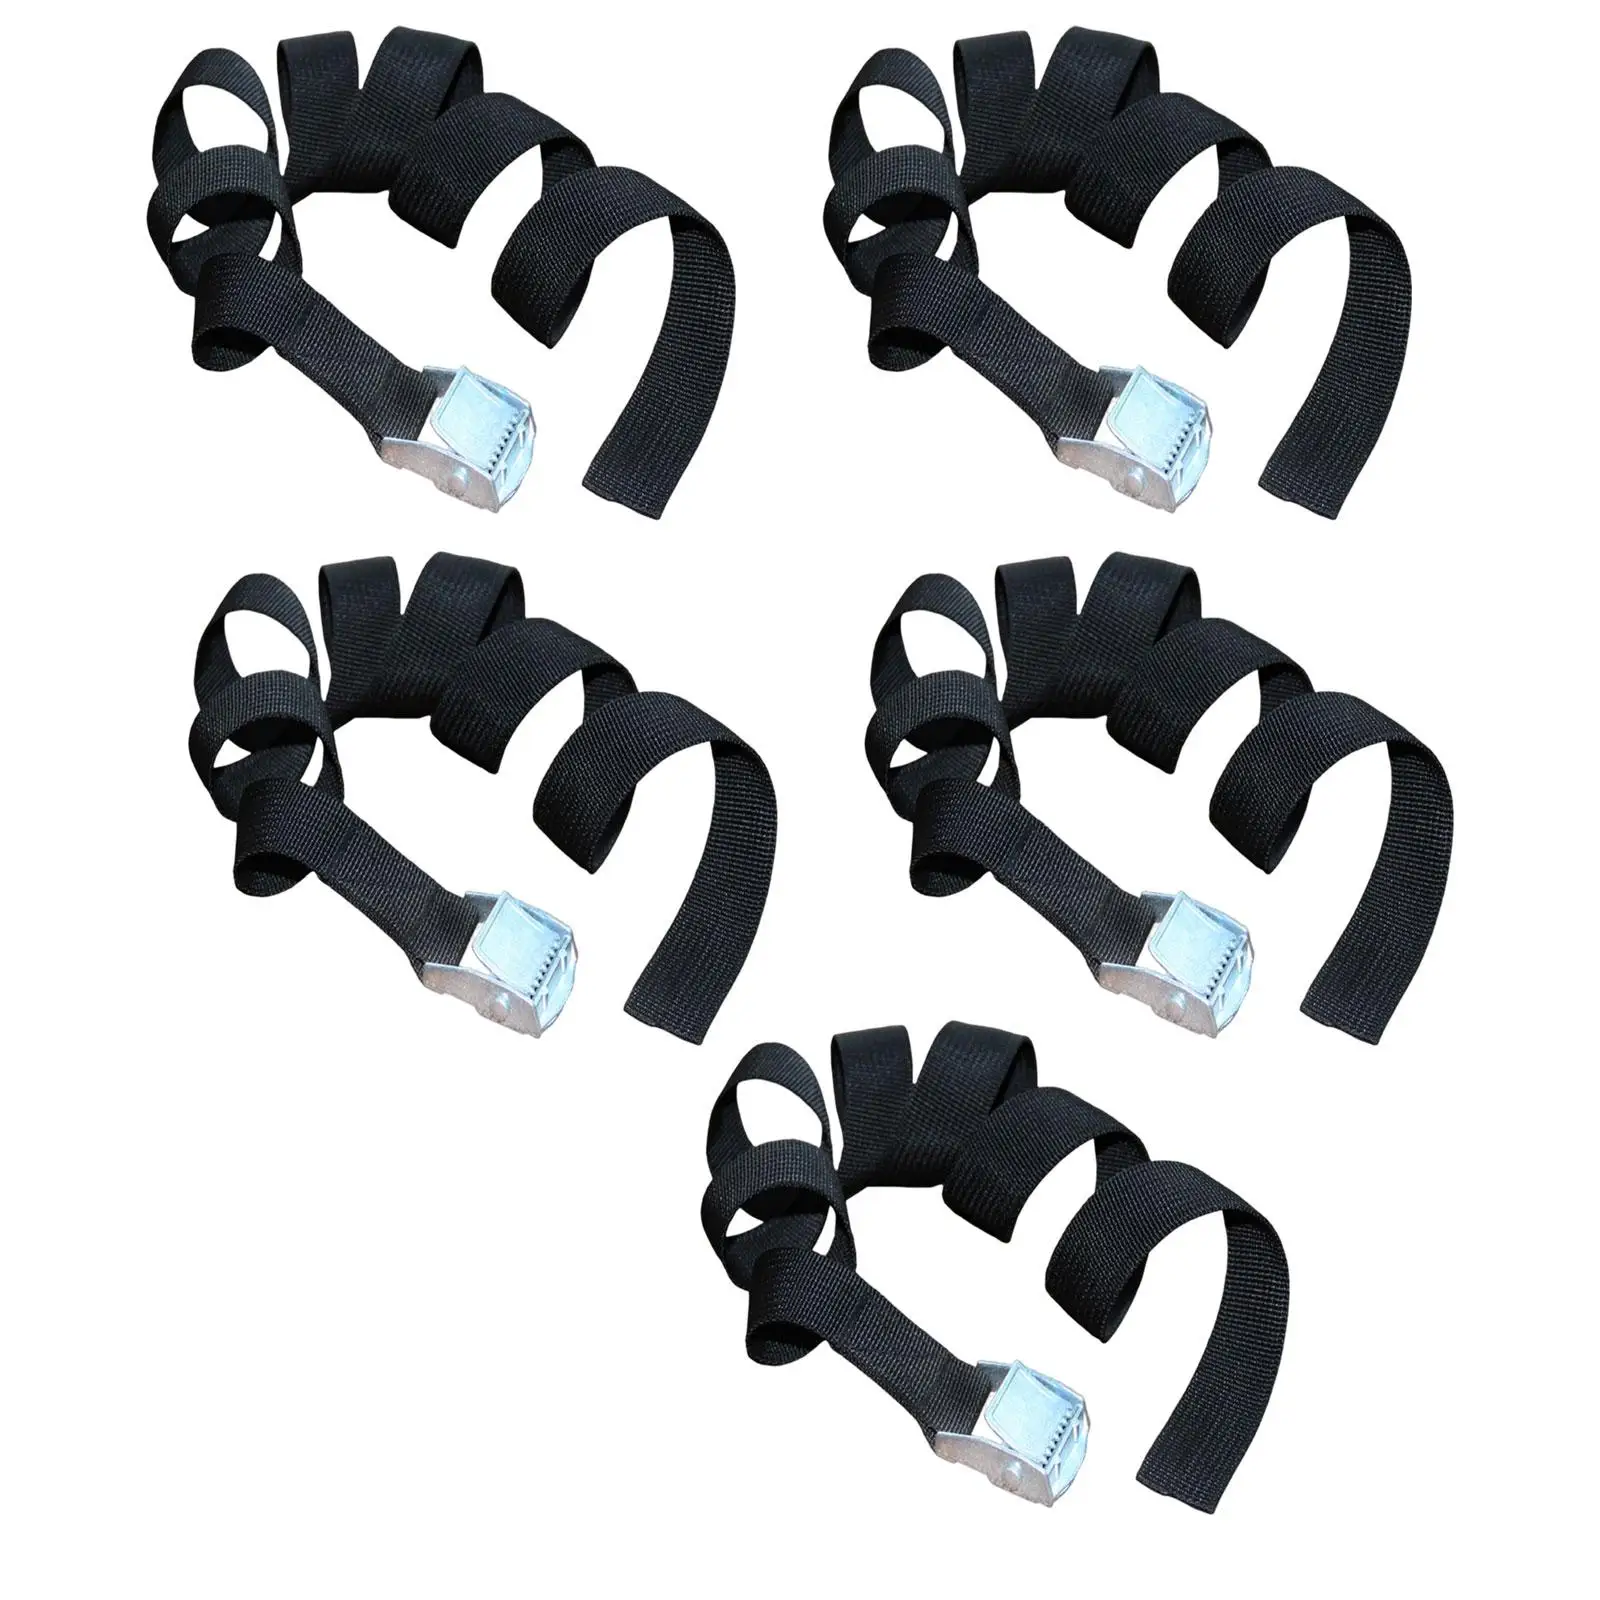 5 Pieces Tie Down Strap with Metal cam Buckle Lashing Strap for Fixing